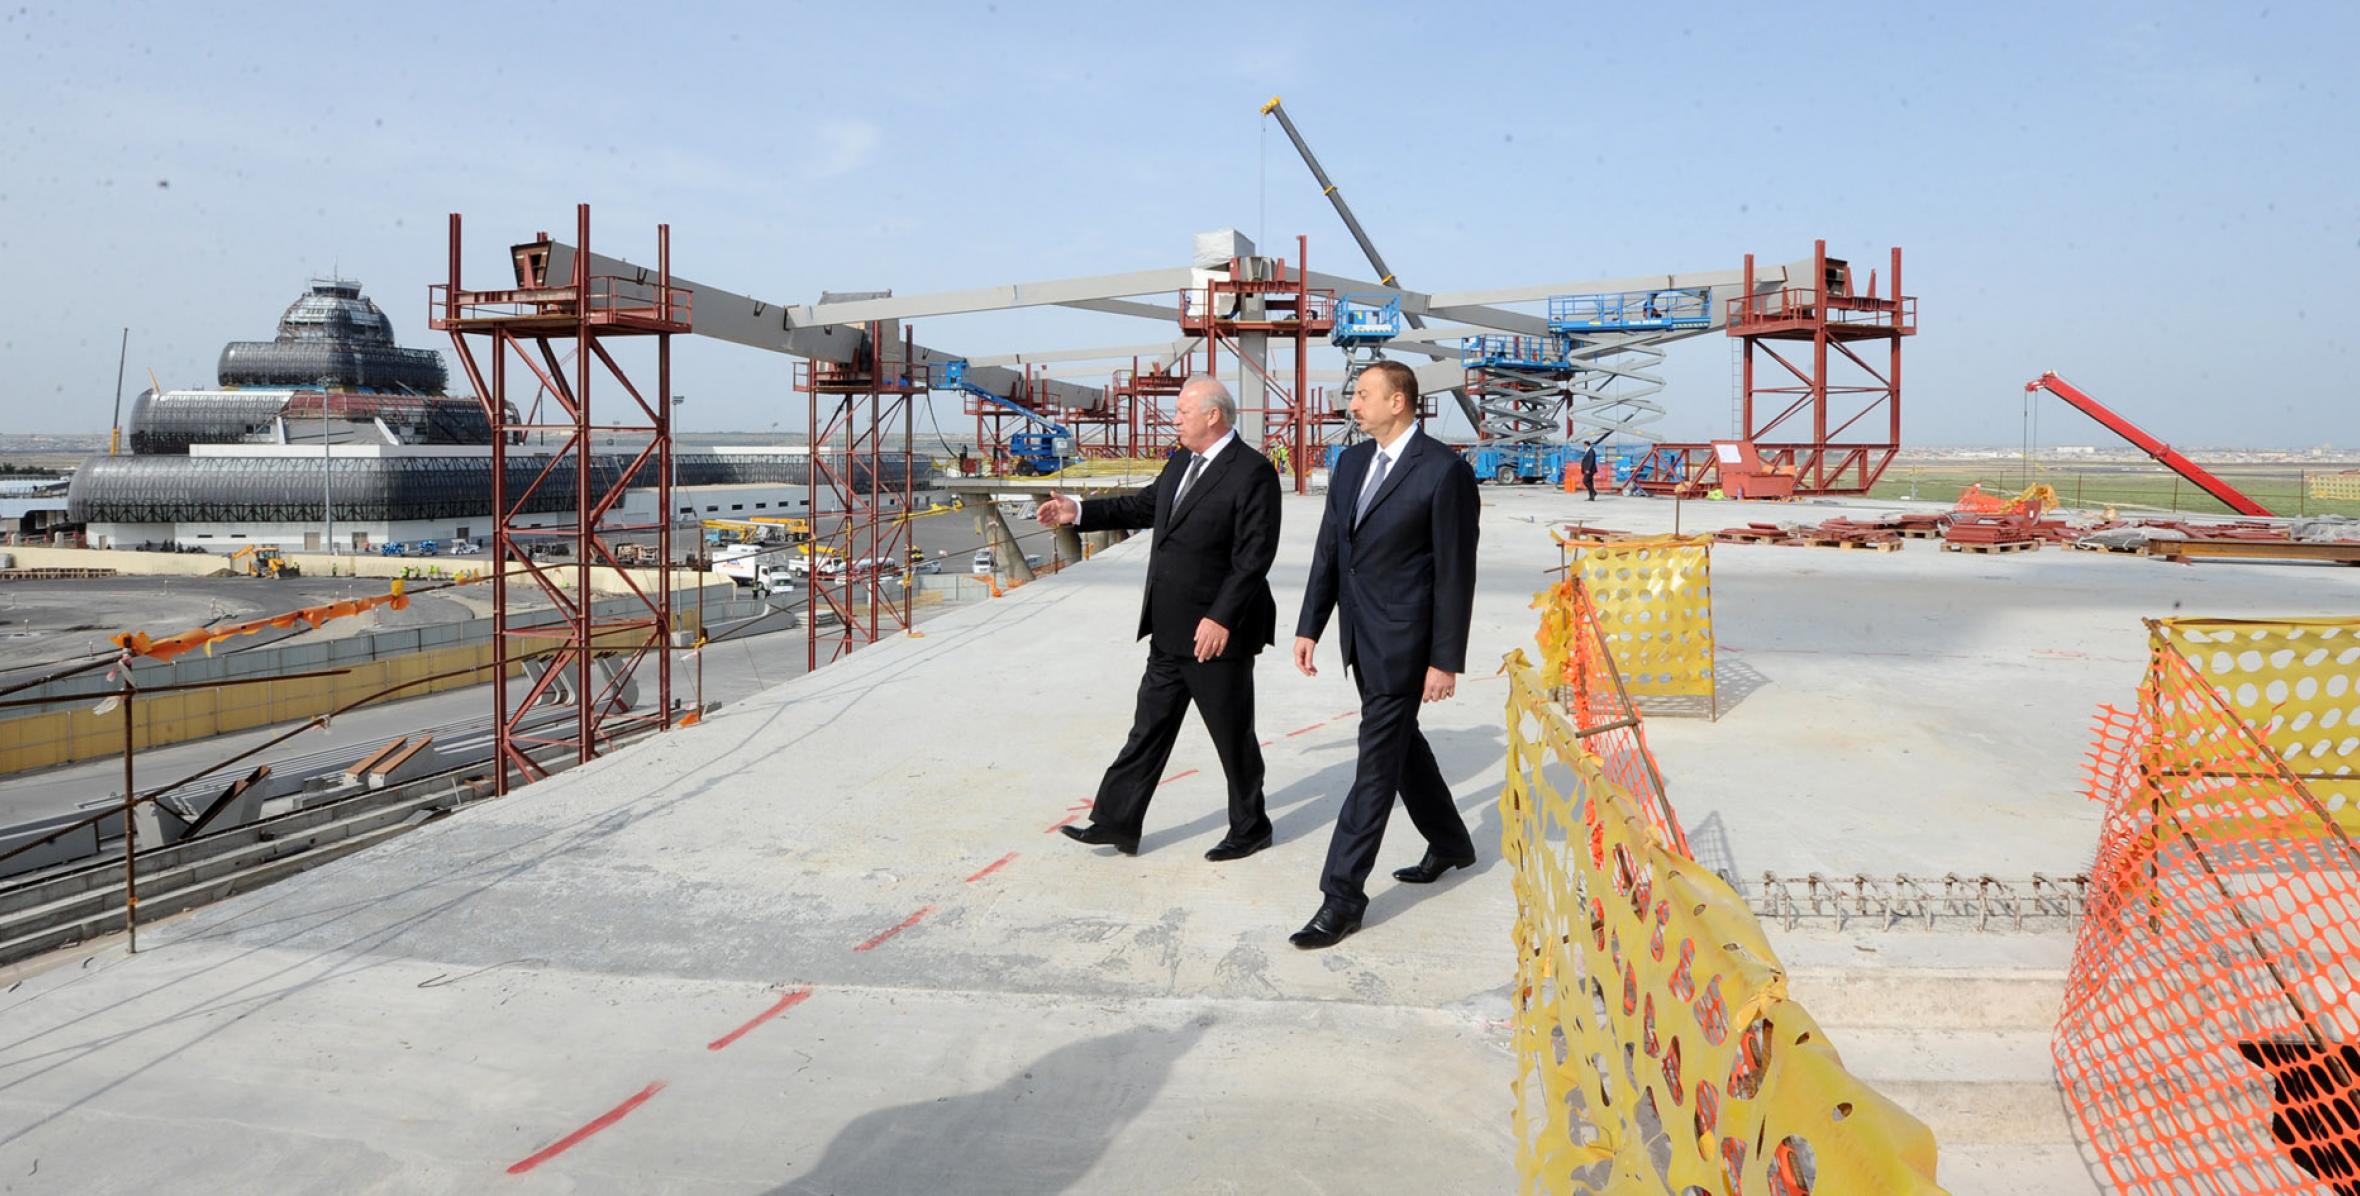 Ilham Aliyev attended a ceremony to commission a new runway at the Heydar Aliyev International Airport